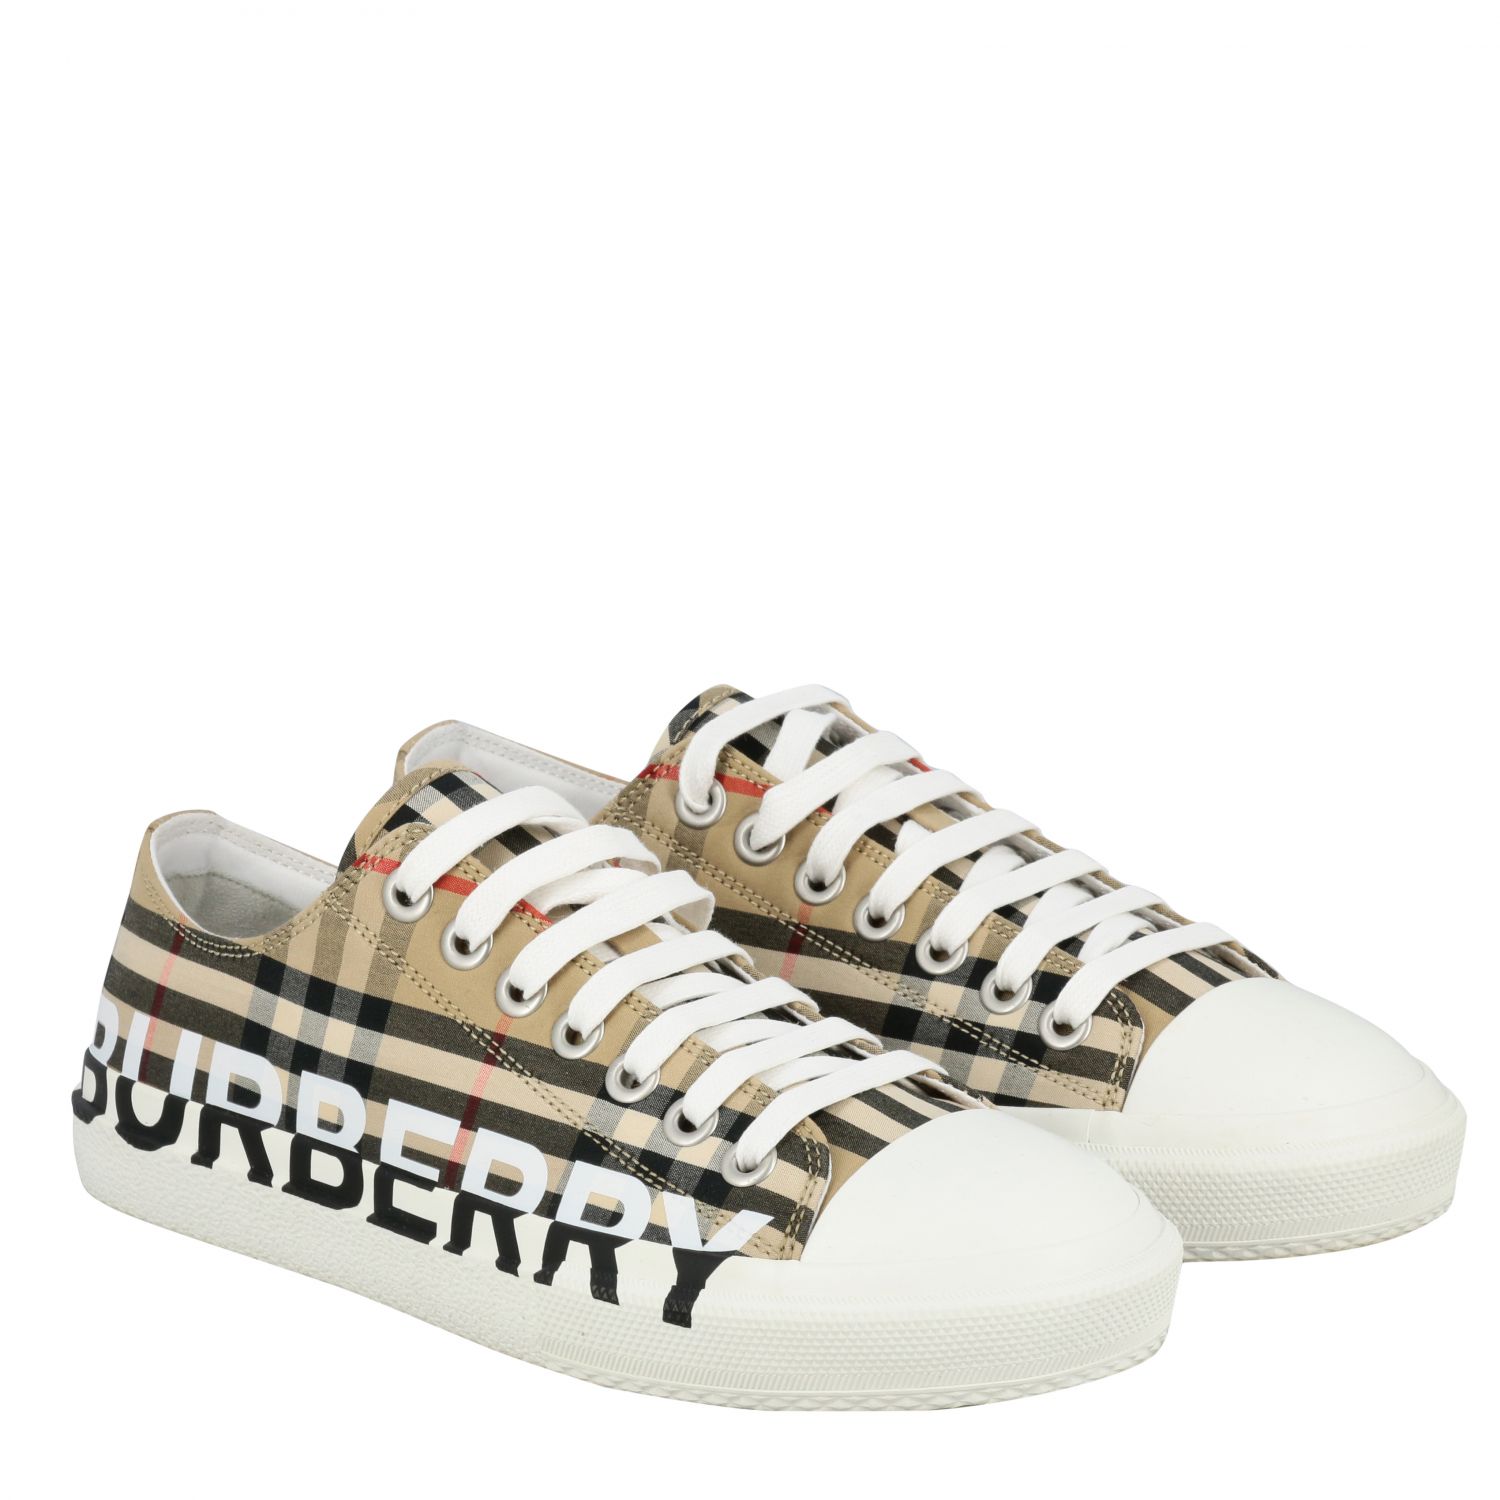 Burberry vintage check cotton sneakers 